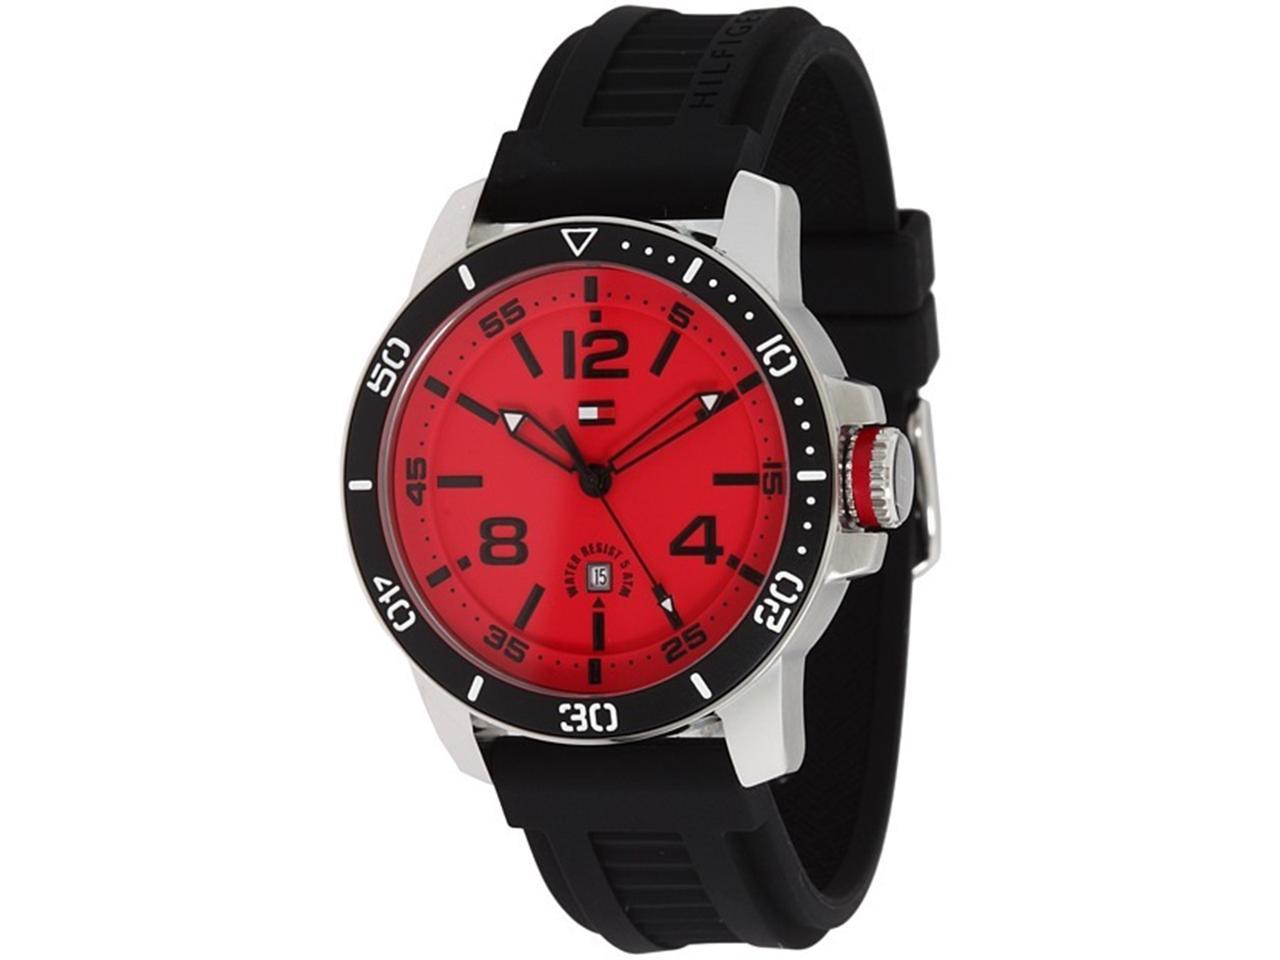 Tommy Hilfiger Synthetic Black Dial Men's Watch #1790848 - Newegg.com